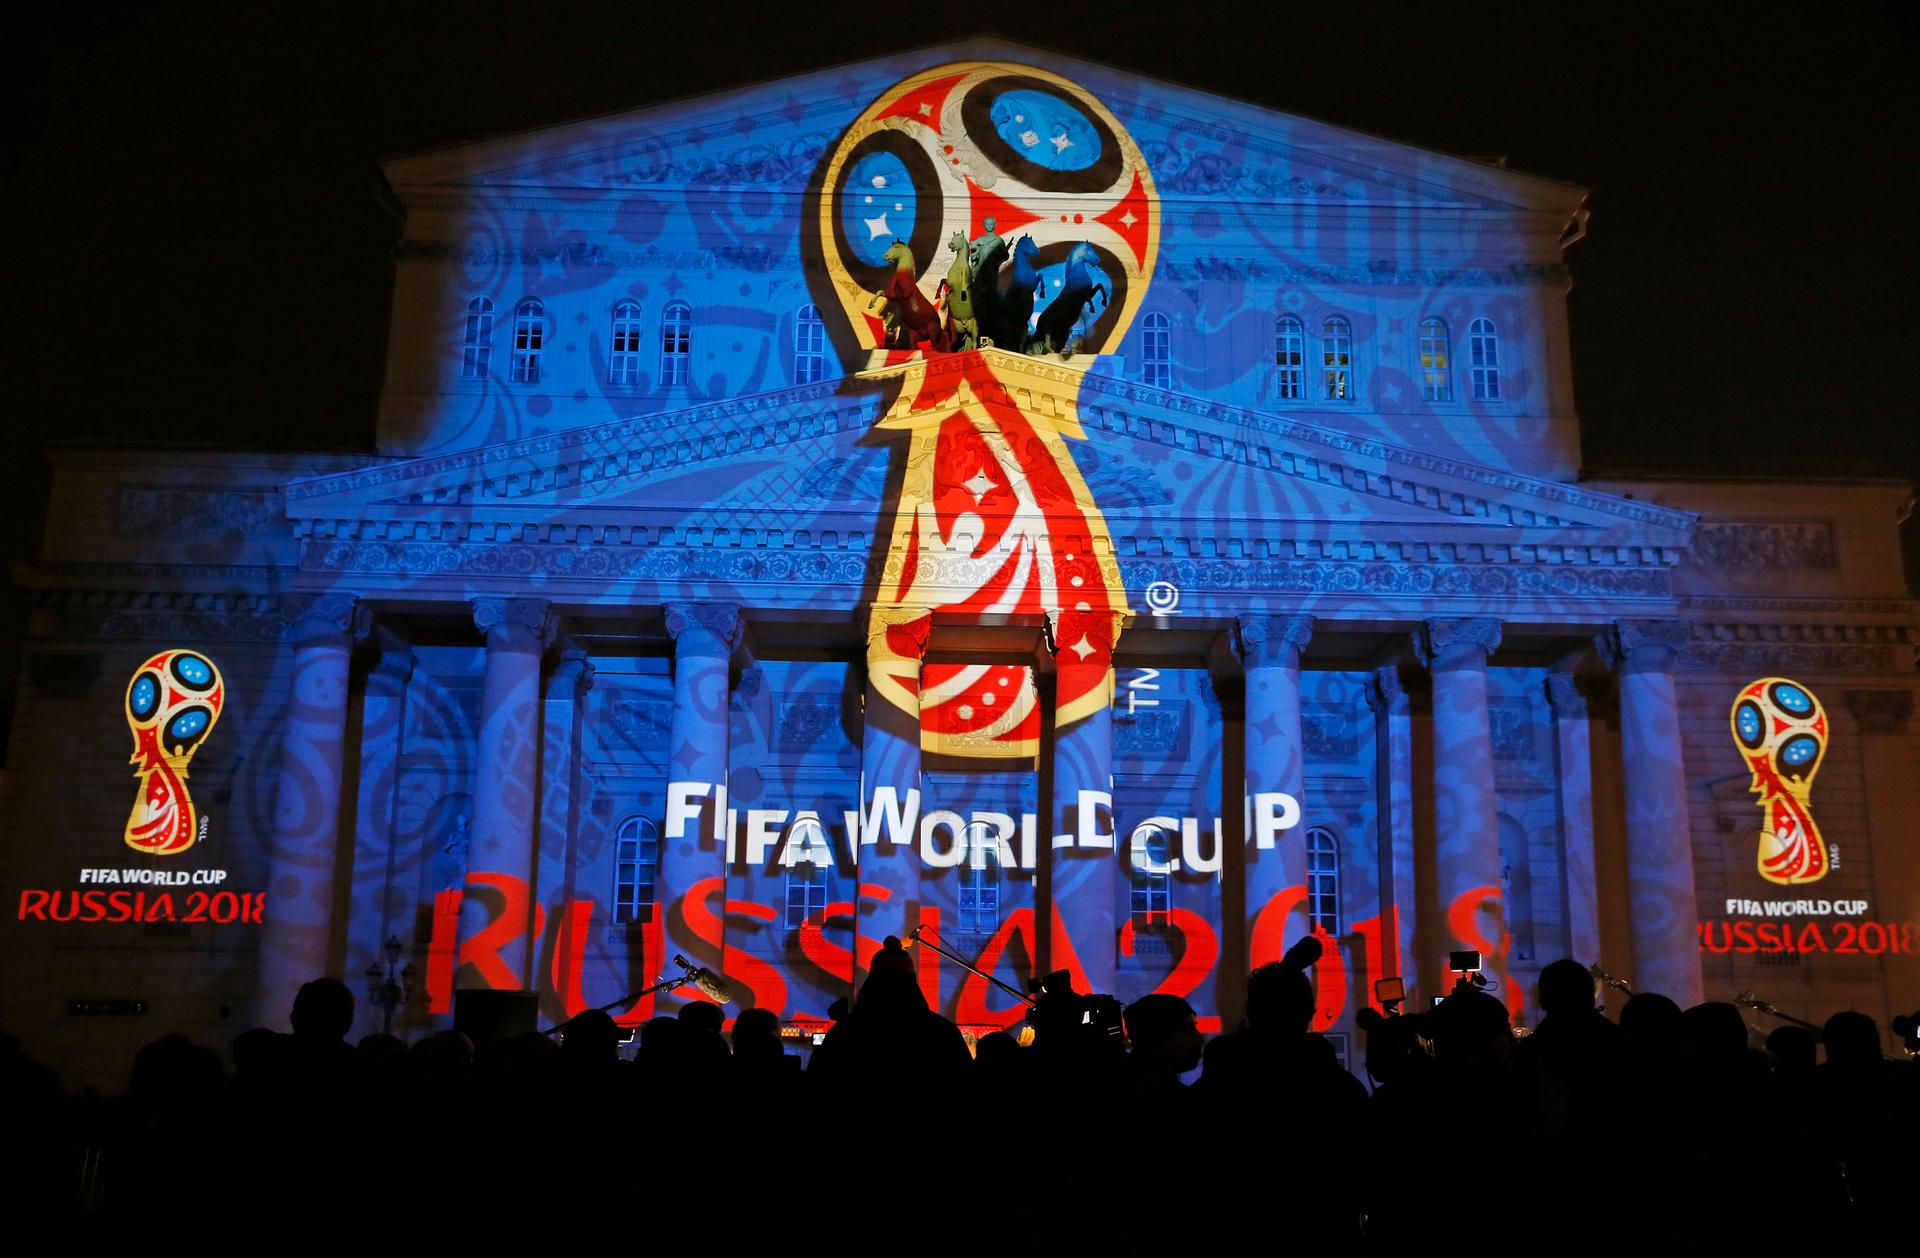 Journalists look at a light installation showing the official logotype of the 2018 FIFA World Cup during its unveiling ceremony at the Bolshoi Theater building in Moscow, October 28, 2014. 